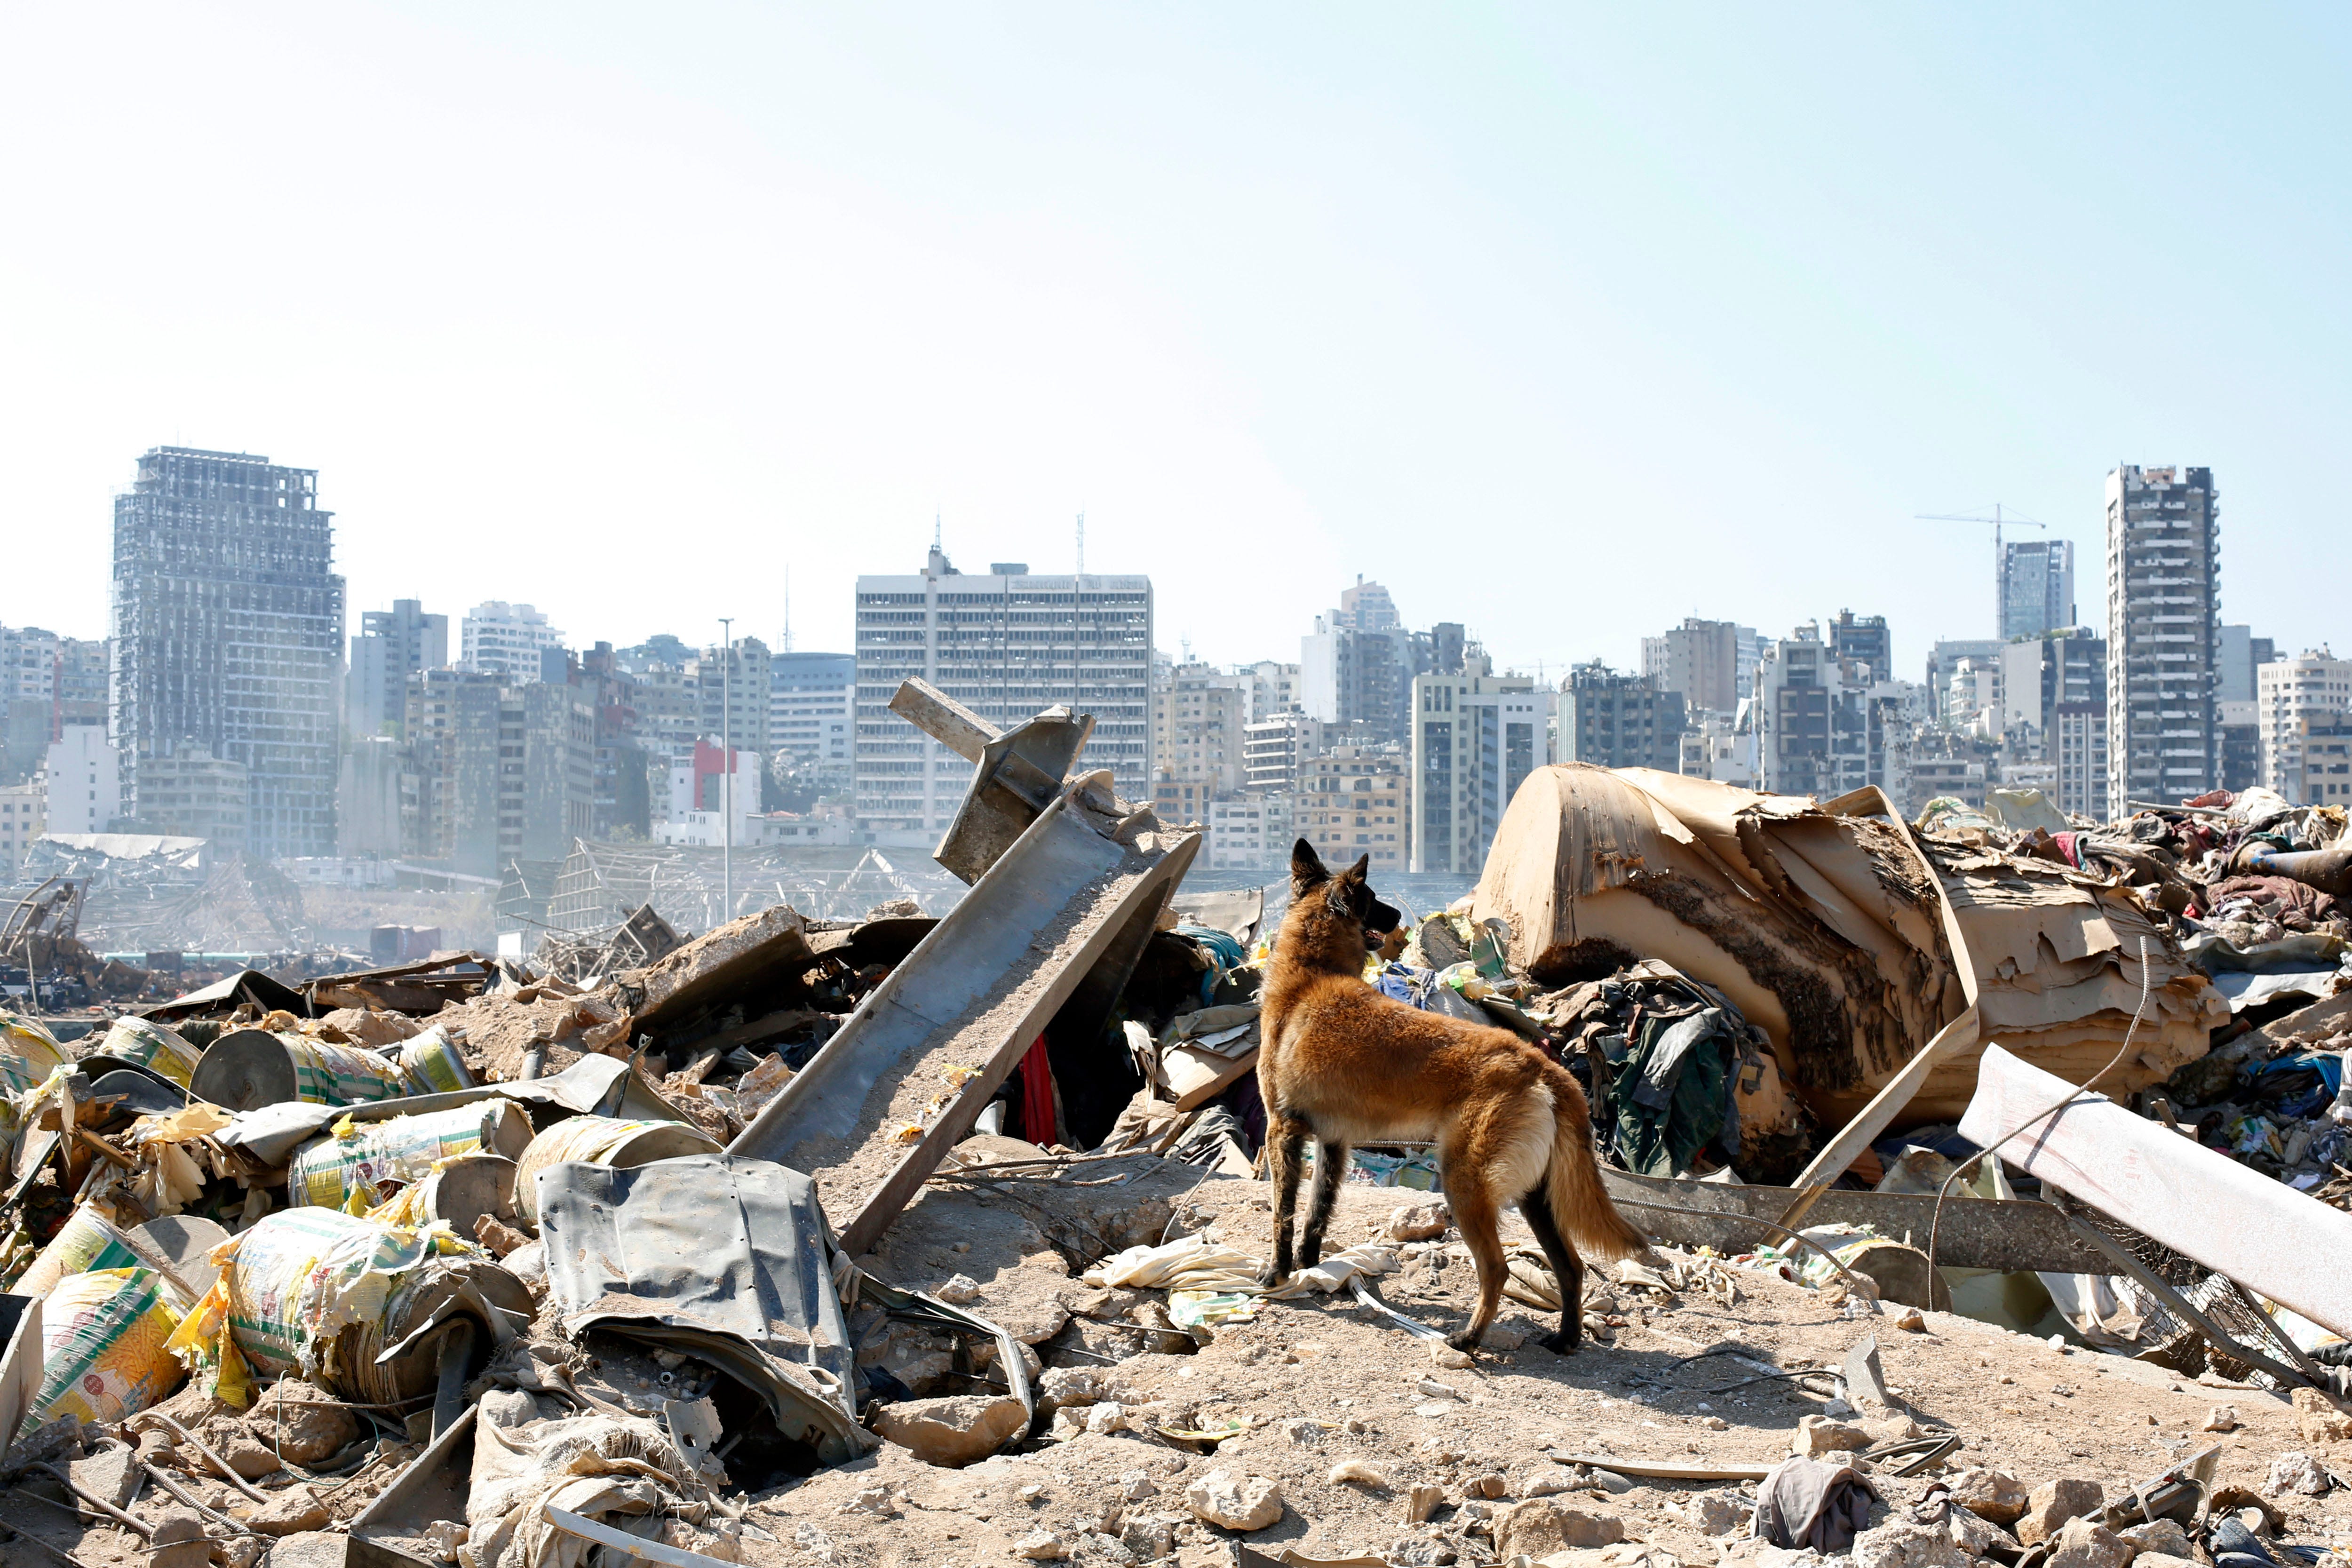 A dog of the French rescue team searches for survivors at the scene of this week's massive explosion in the port of Beirut, Lebanon, Friday, Aug. 7, 2020. Three days after a massive explosion rocked Beirut, killing over a hundred people and causing widespread devastation, rescuers are still searching for survivors and the government is investigating what caused the disaster.